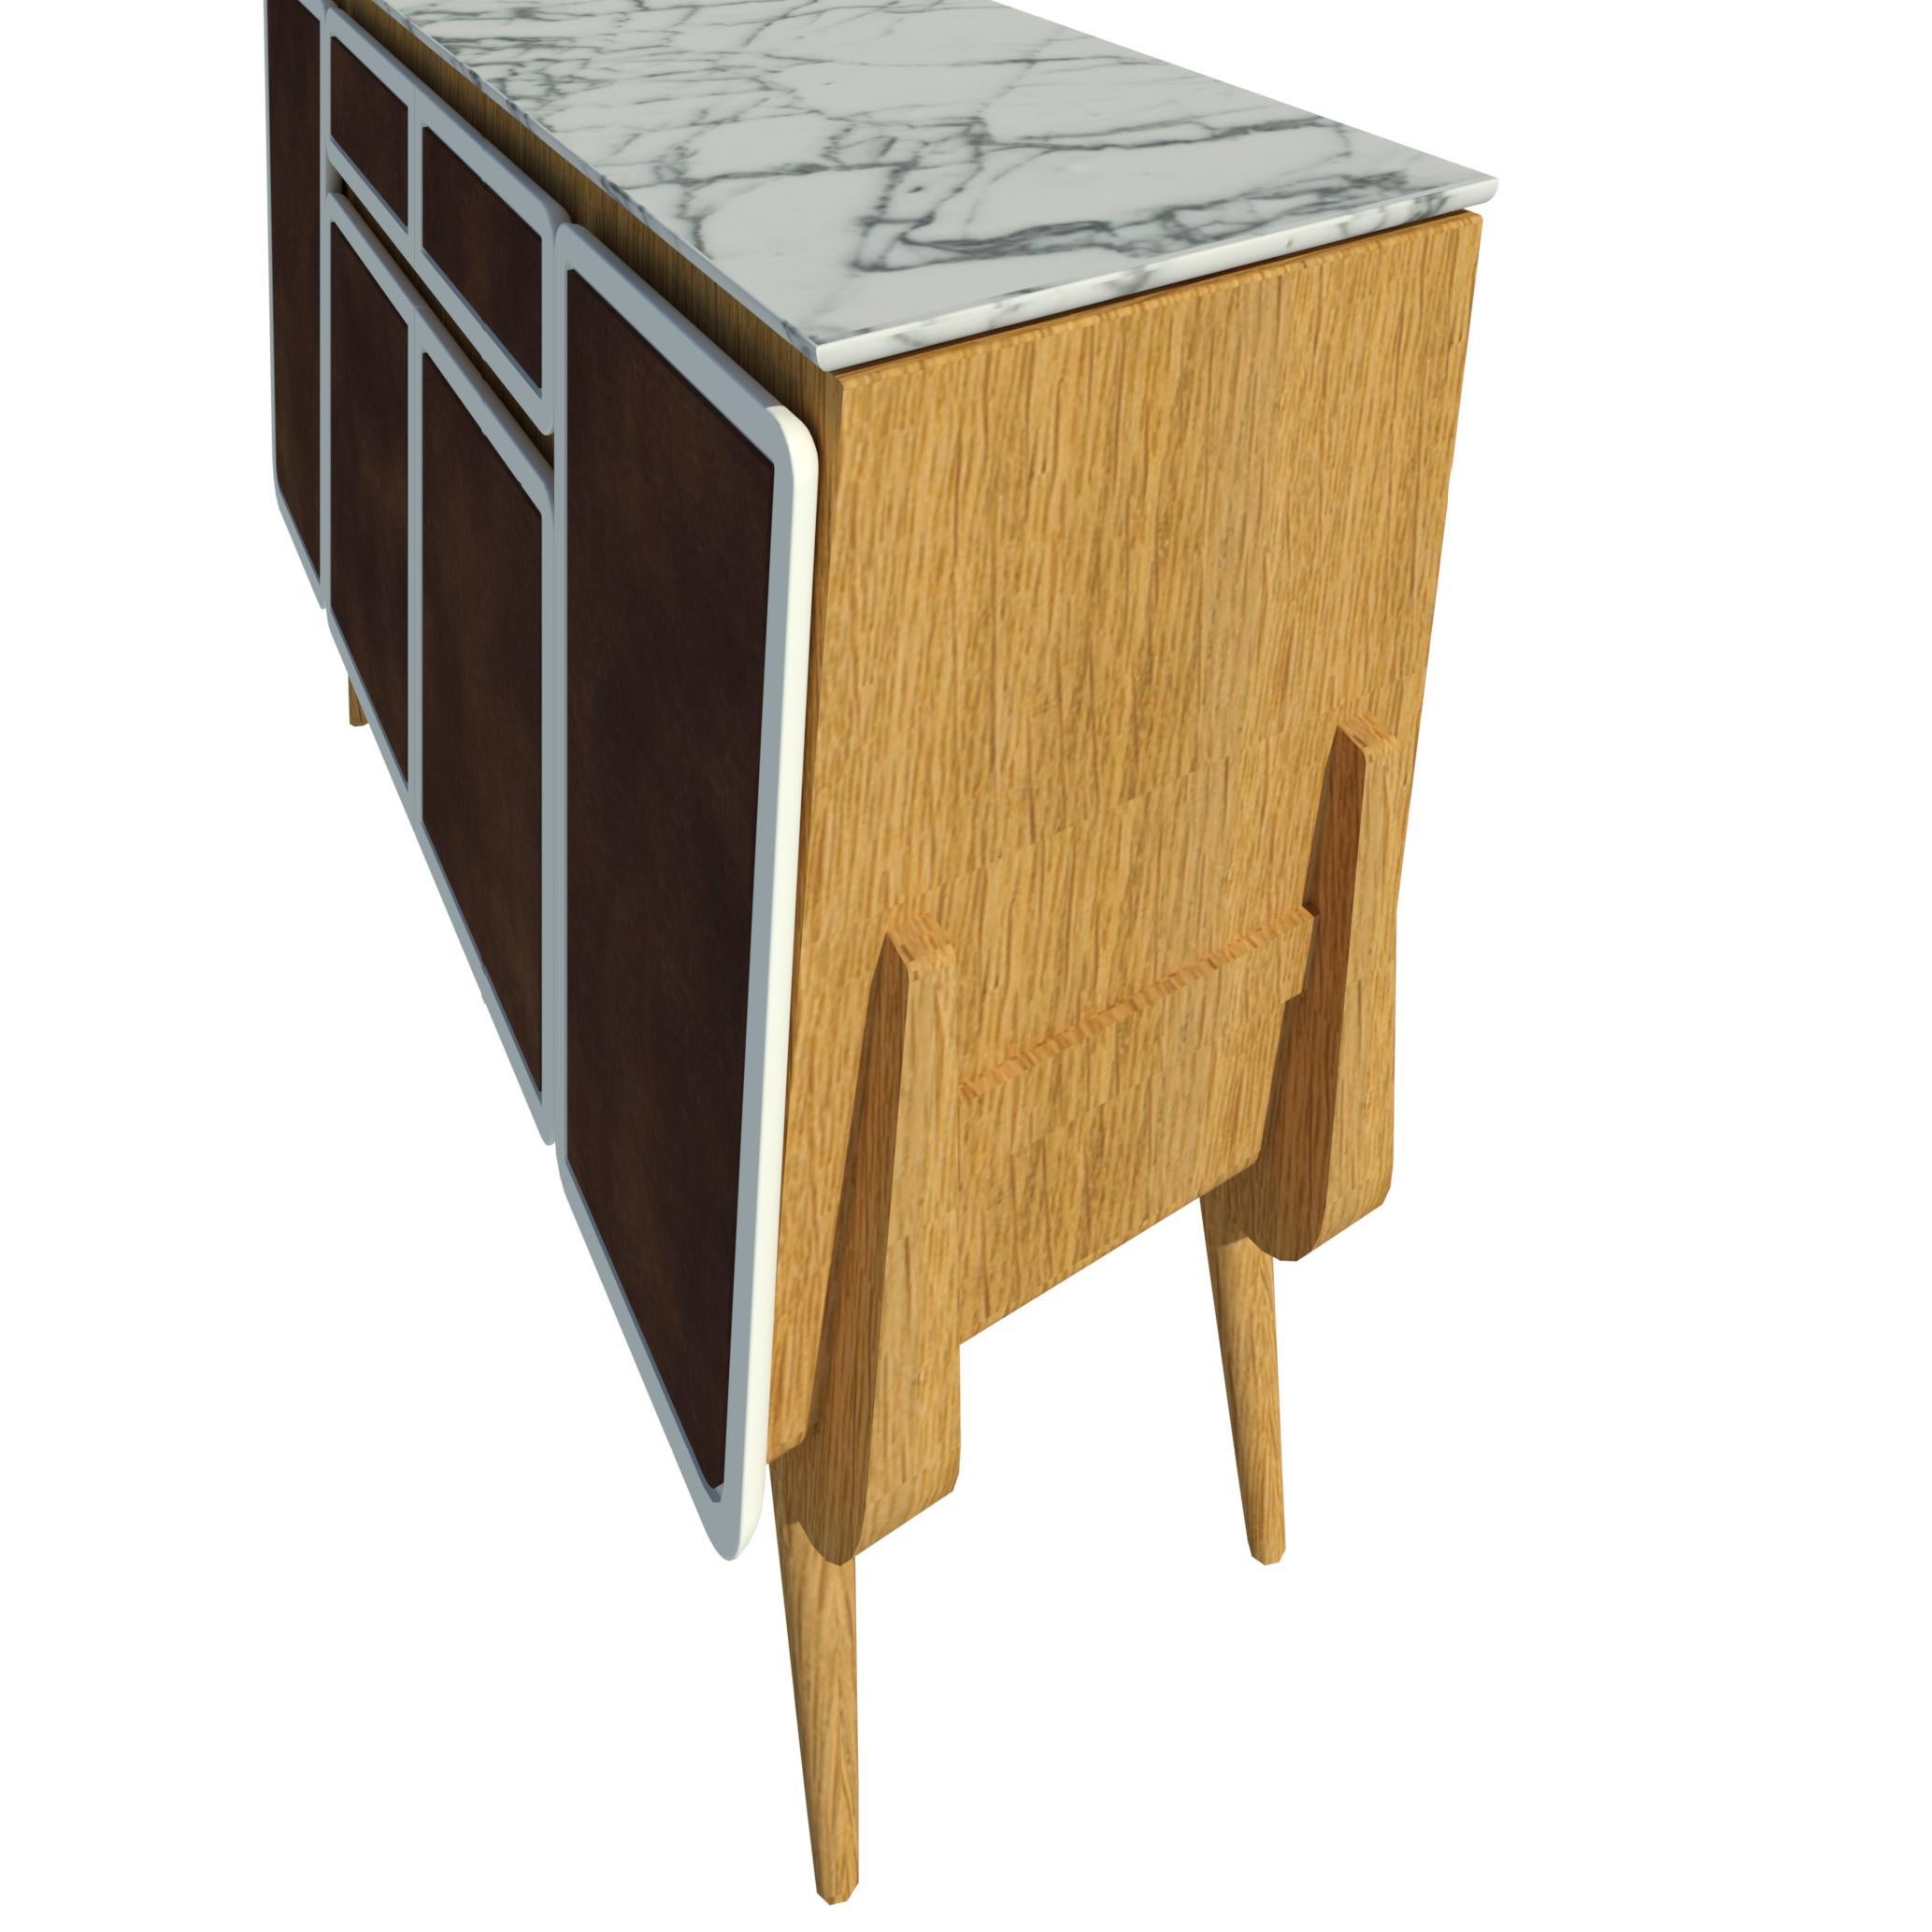 Polished Credenza M04 Contemporary Cabinet Lacquer White Oak Marble top Made in Italy For Sale